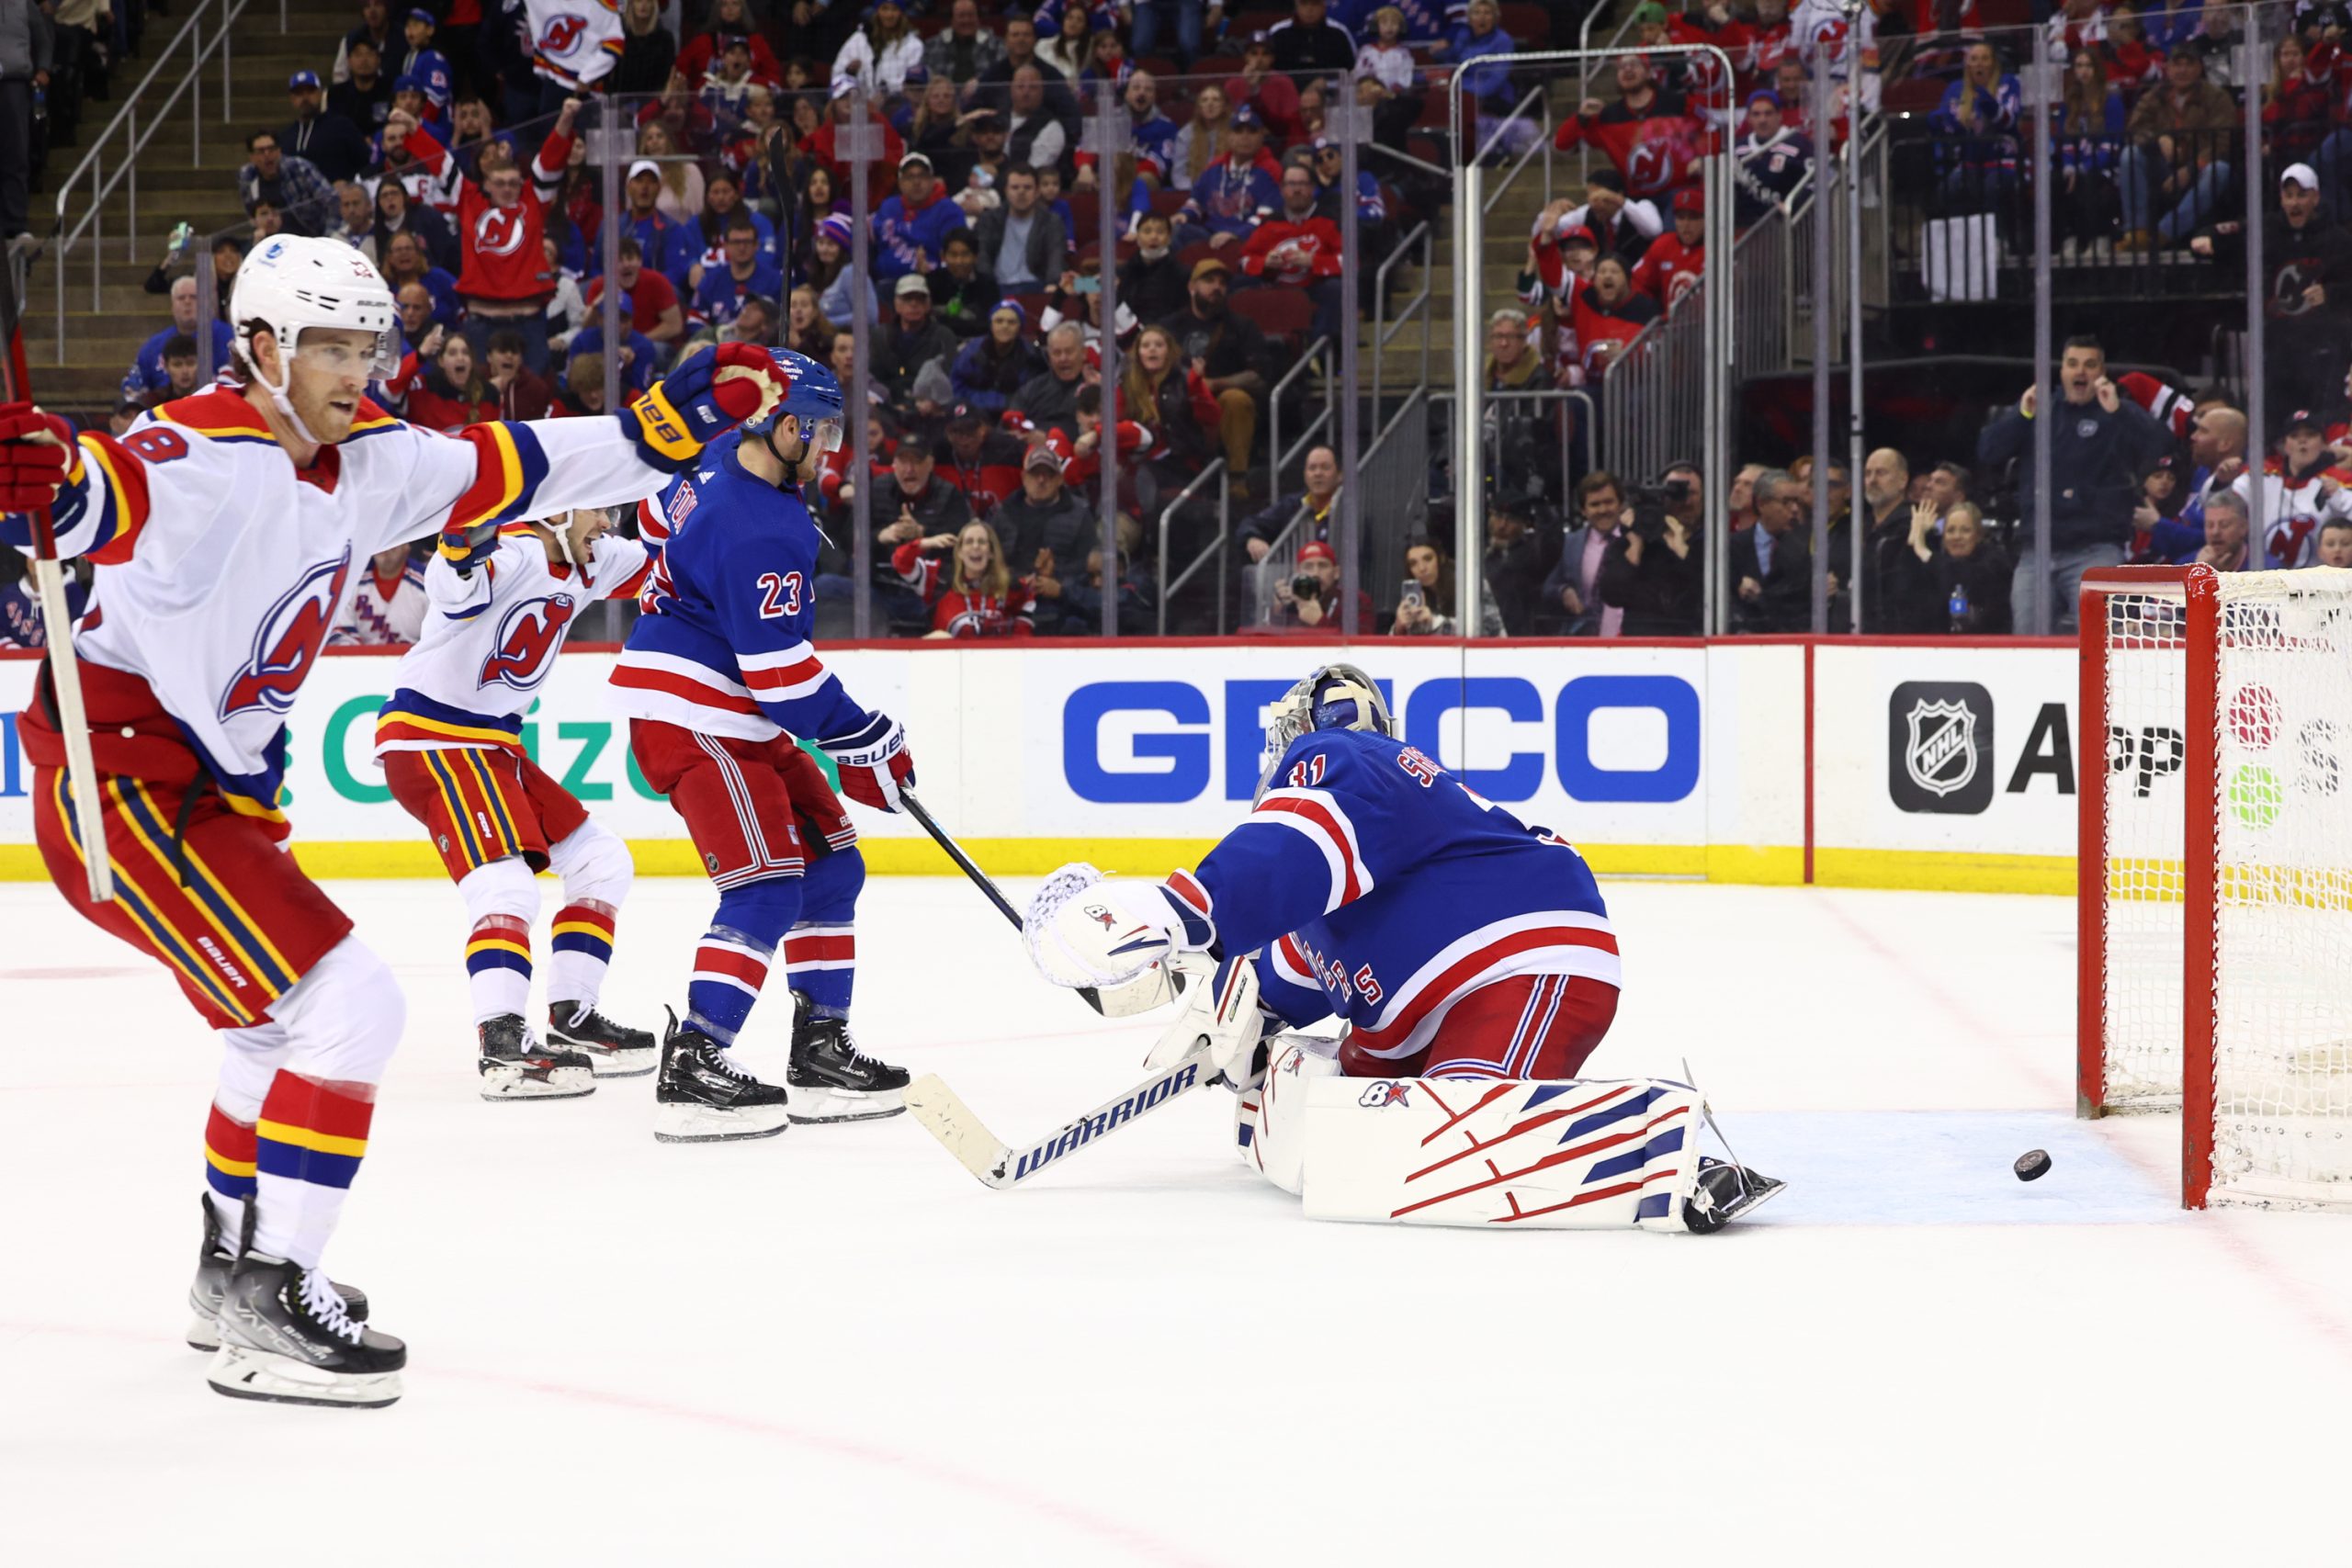 New York Rangers vs New Jersey Devils series preview and prediction